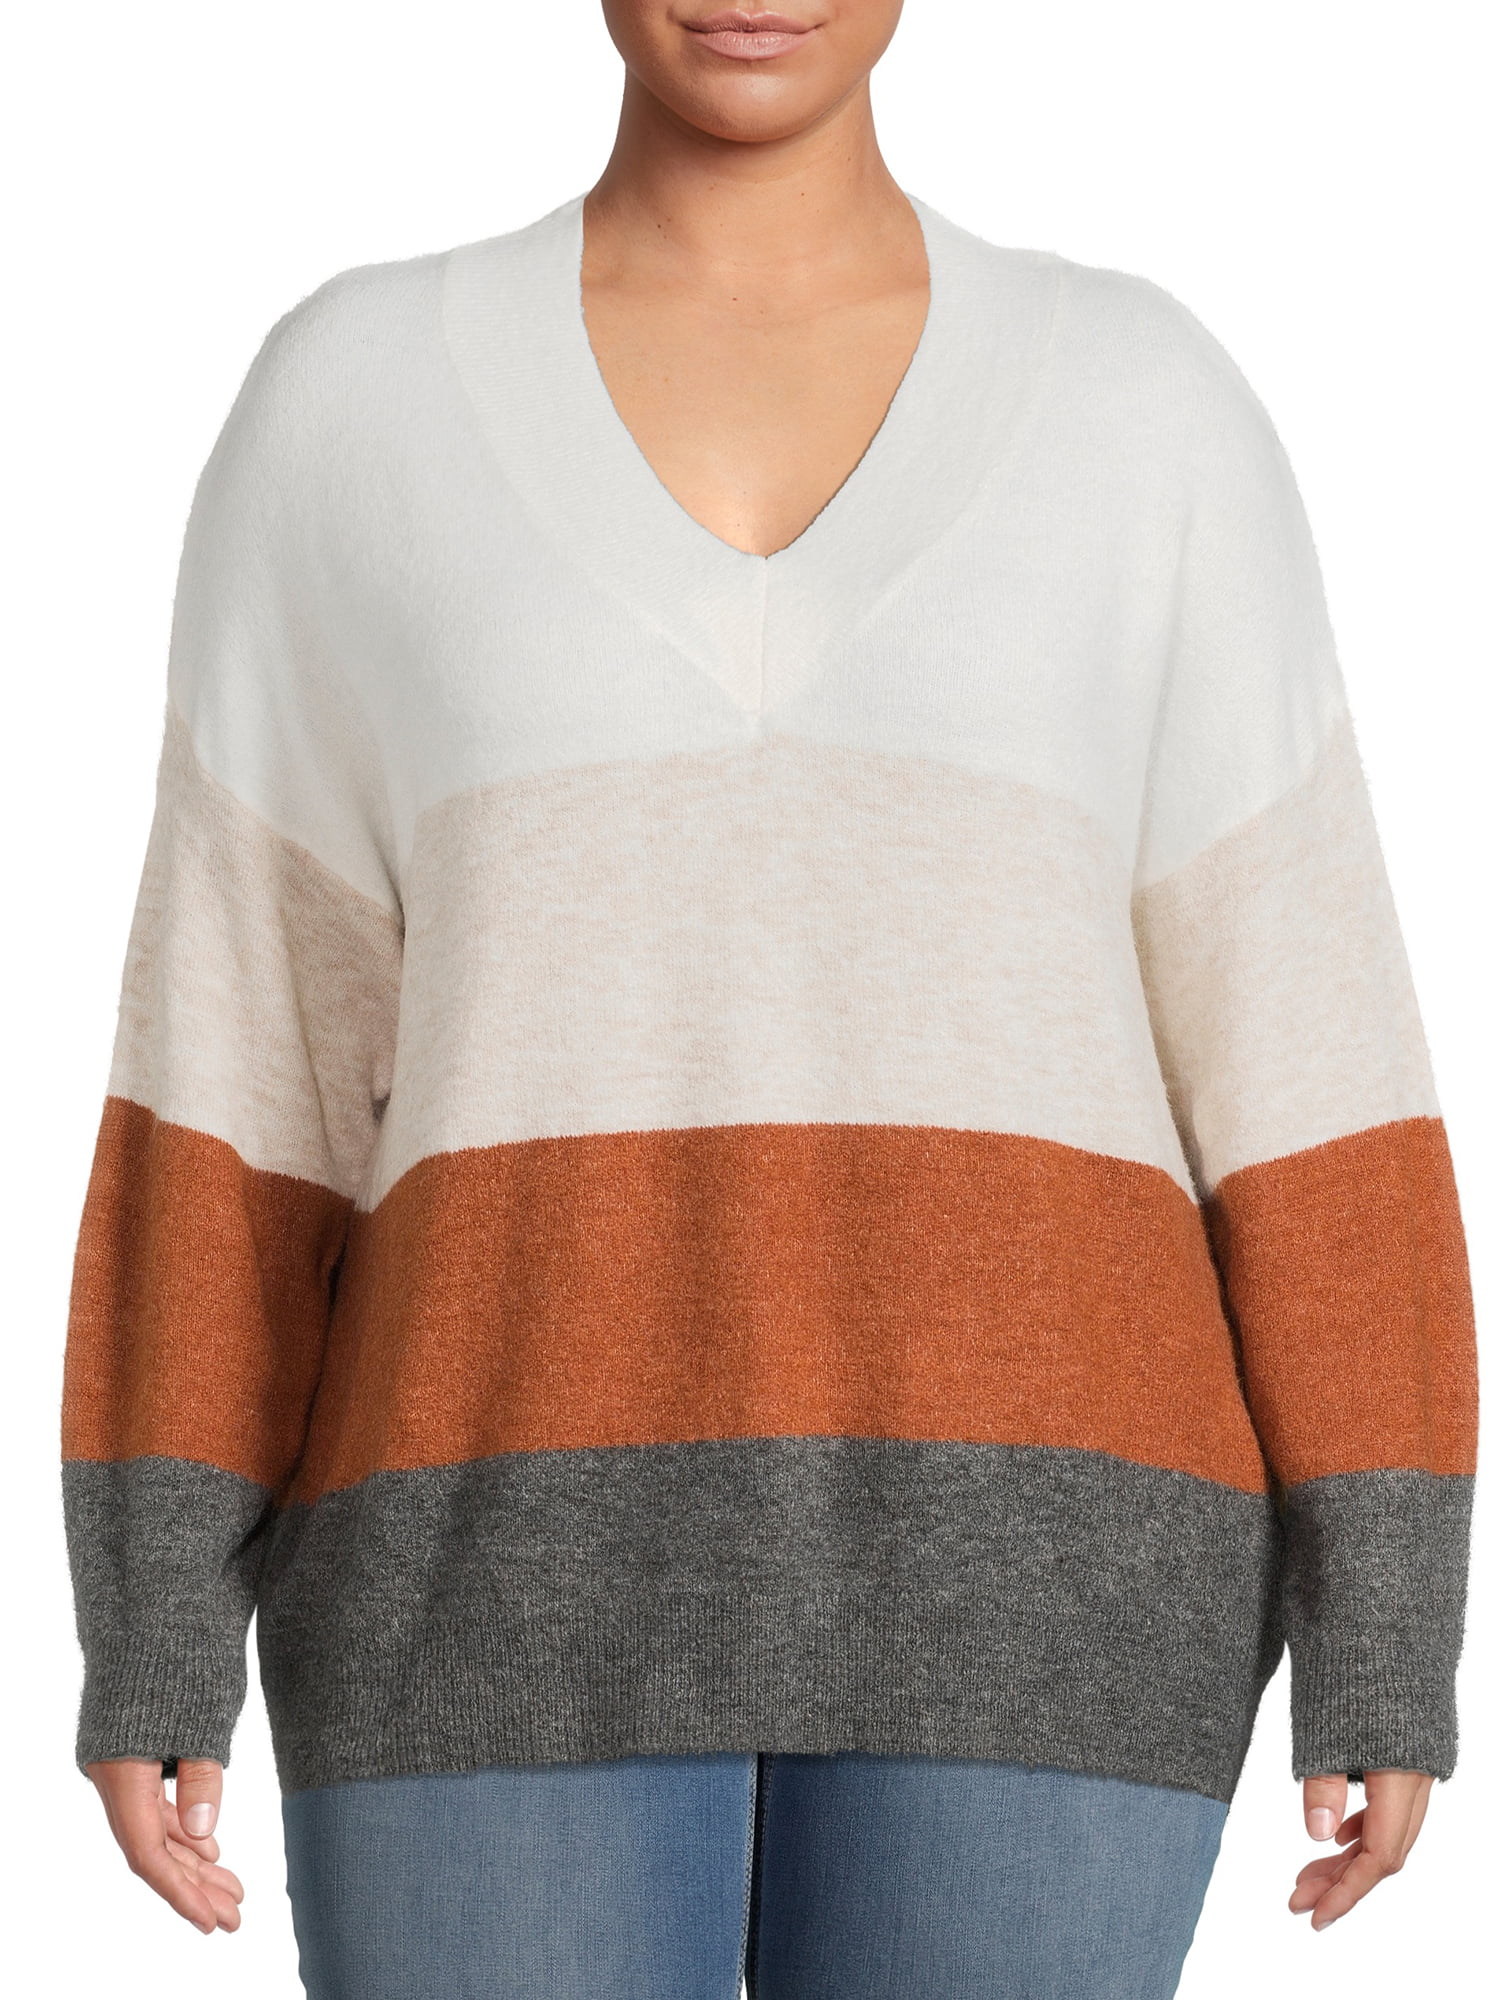 Dreamers by Debut Plus Size Colorblocked V-Neck Sweater - Walmart.com